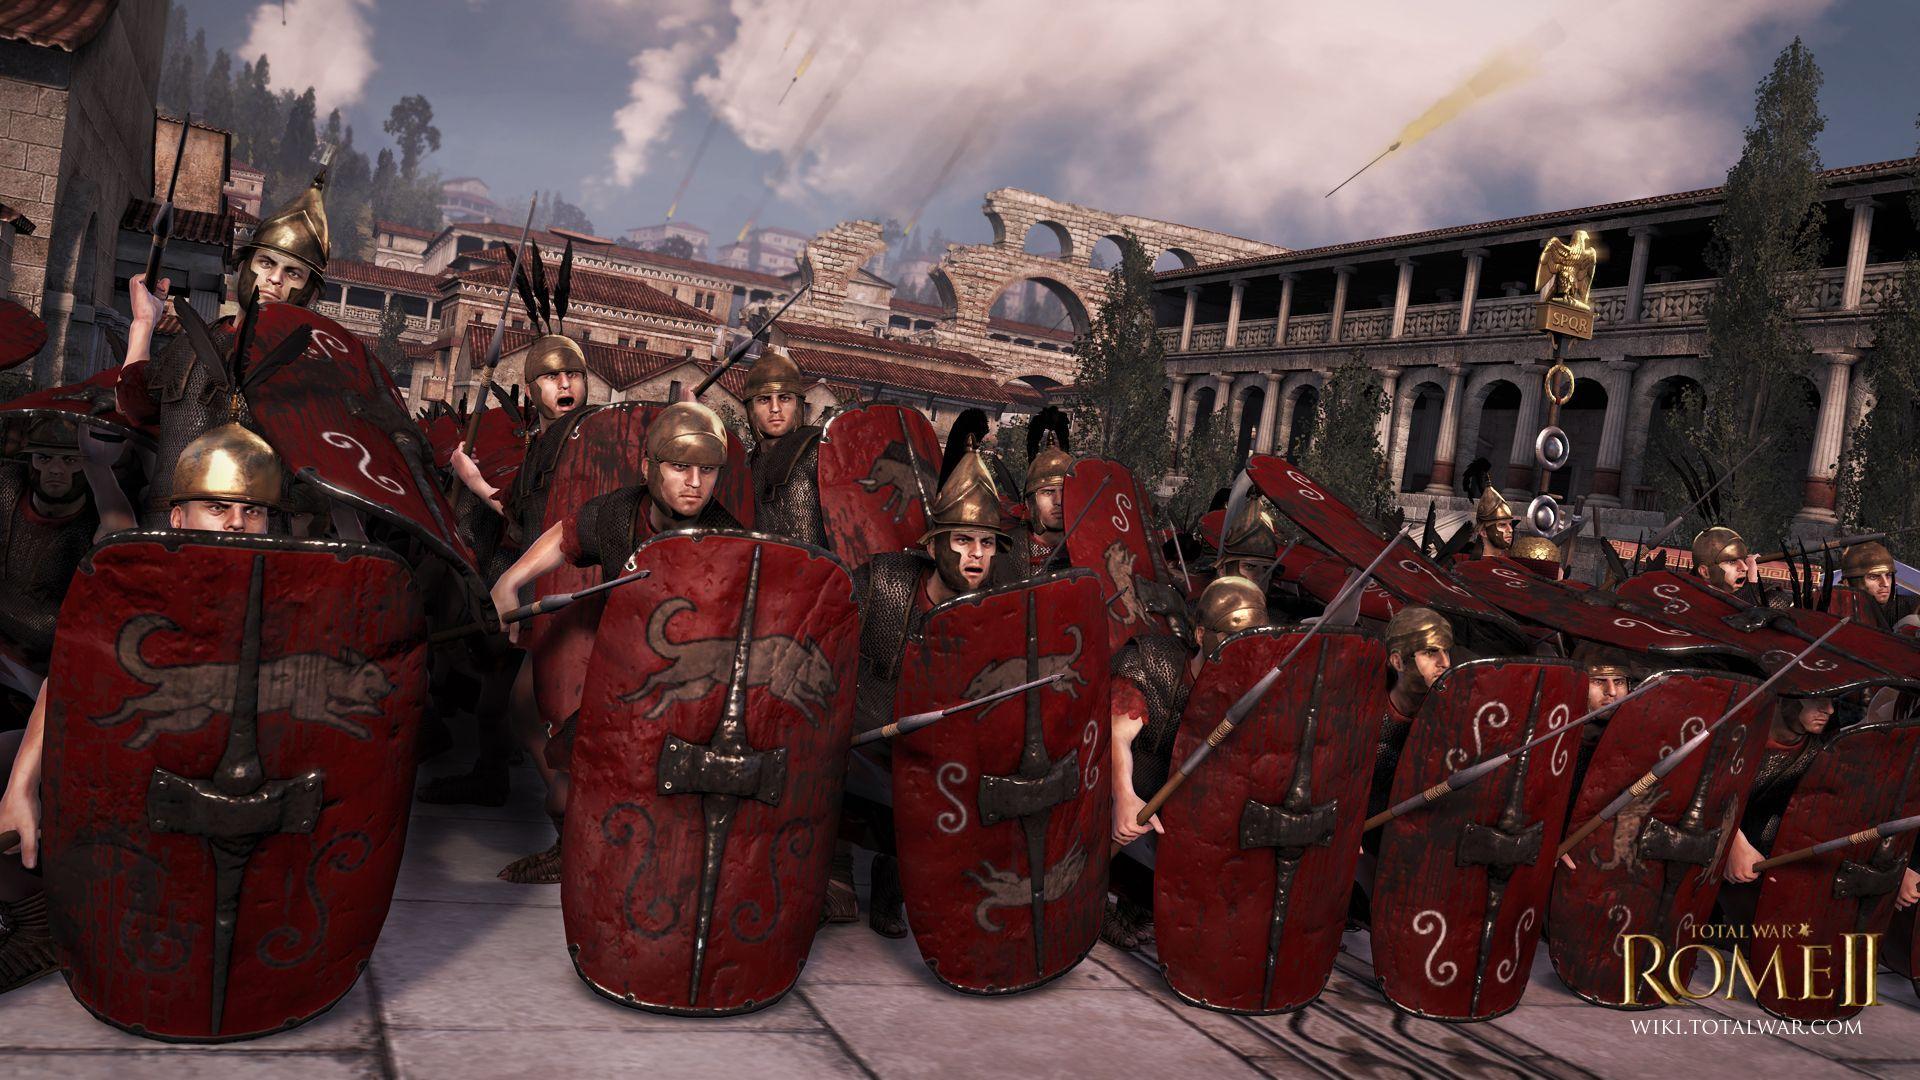 weapons of the roman army pics. Total War Rome 2 Wallpaper Gallery